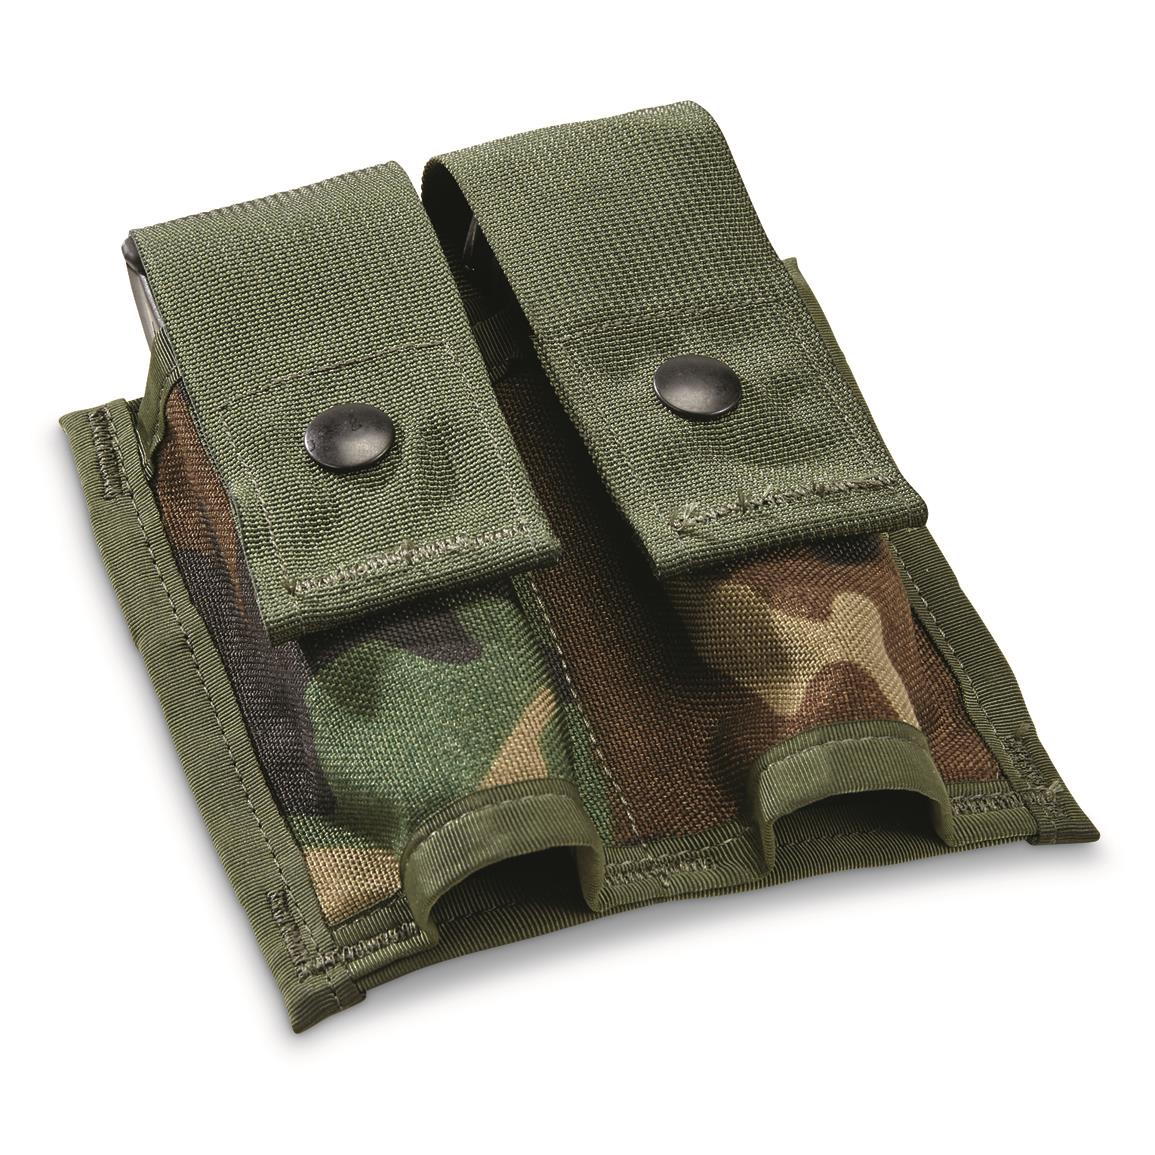 USGI MILITARY WOODLAND BDU MOLLE II 40MM HIGH PYROTECHNIC DOUBLE GRENADE POUCH 